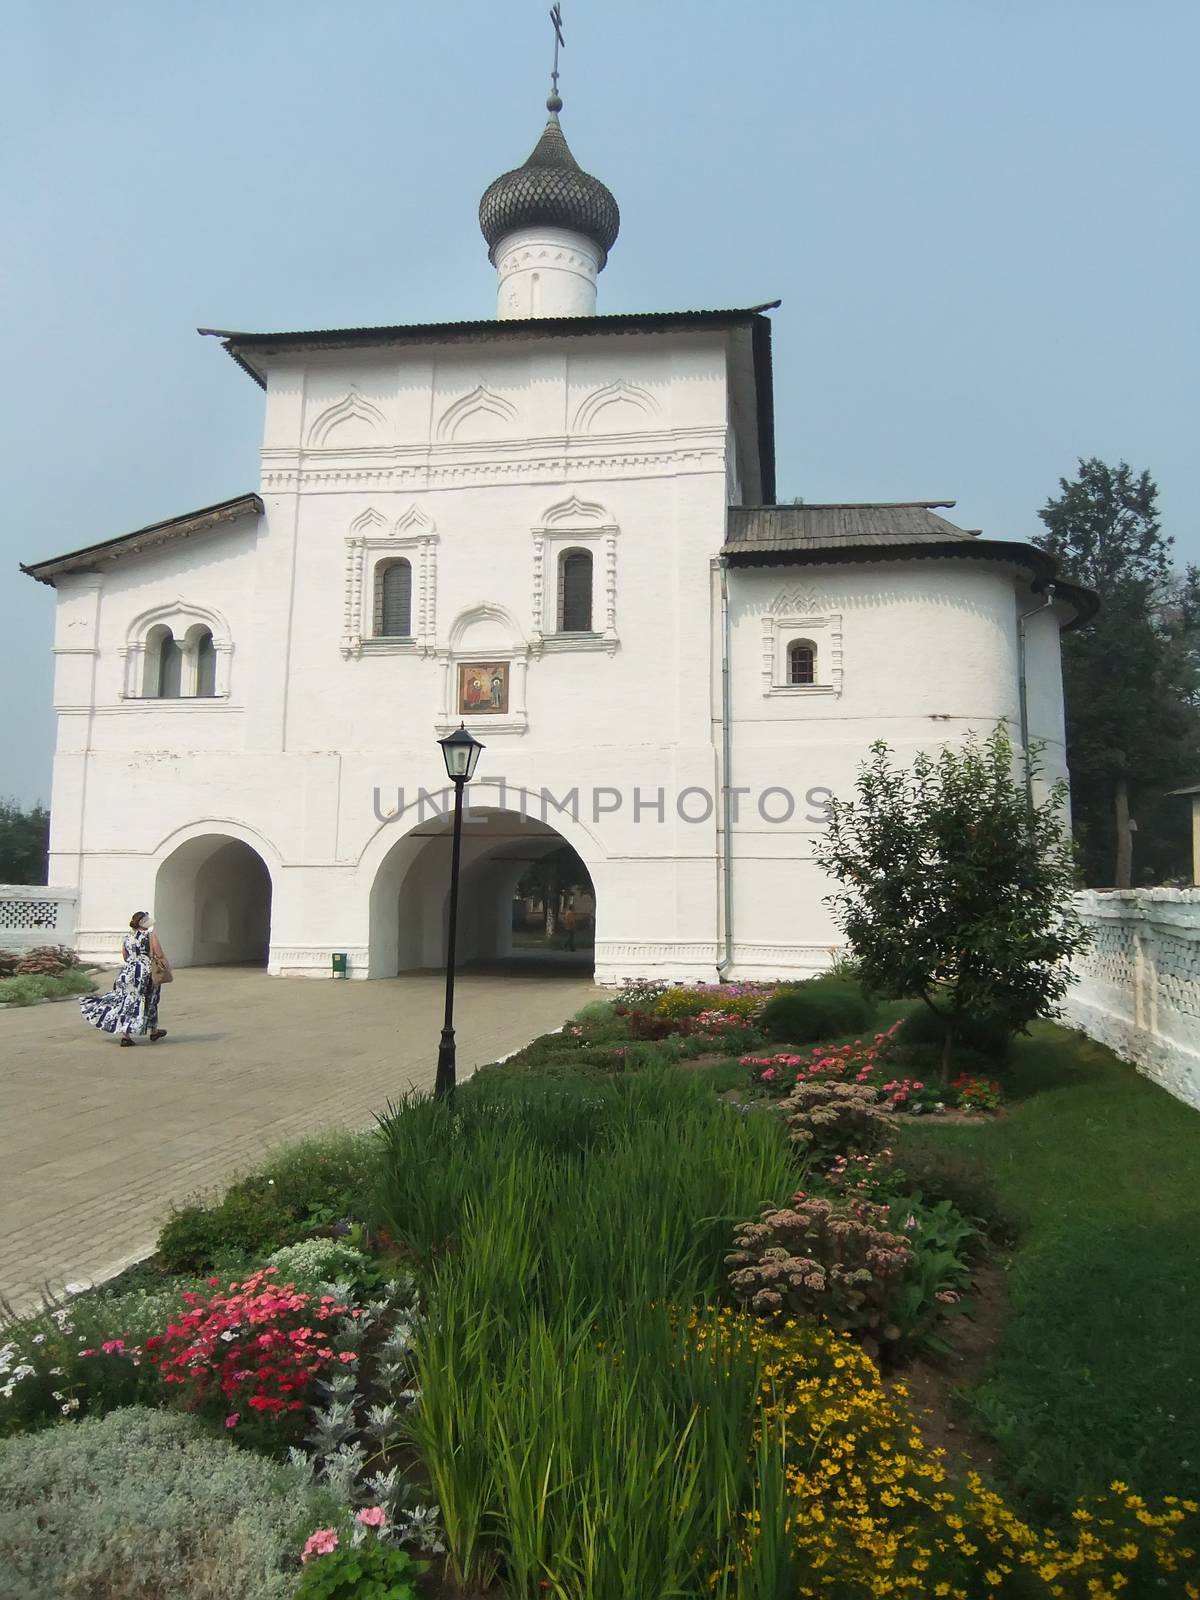 Annunciation Gate Church in Monastery of Saint Euthymius in Suzdal, Russia